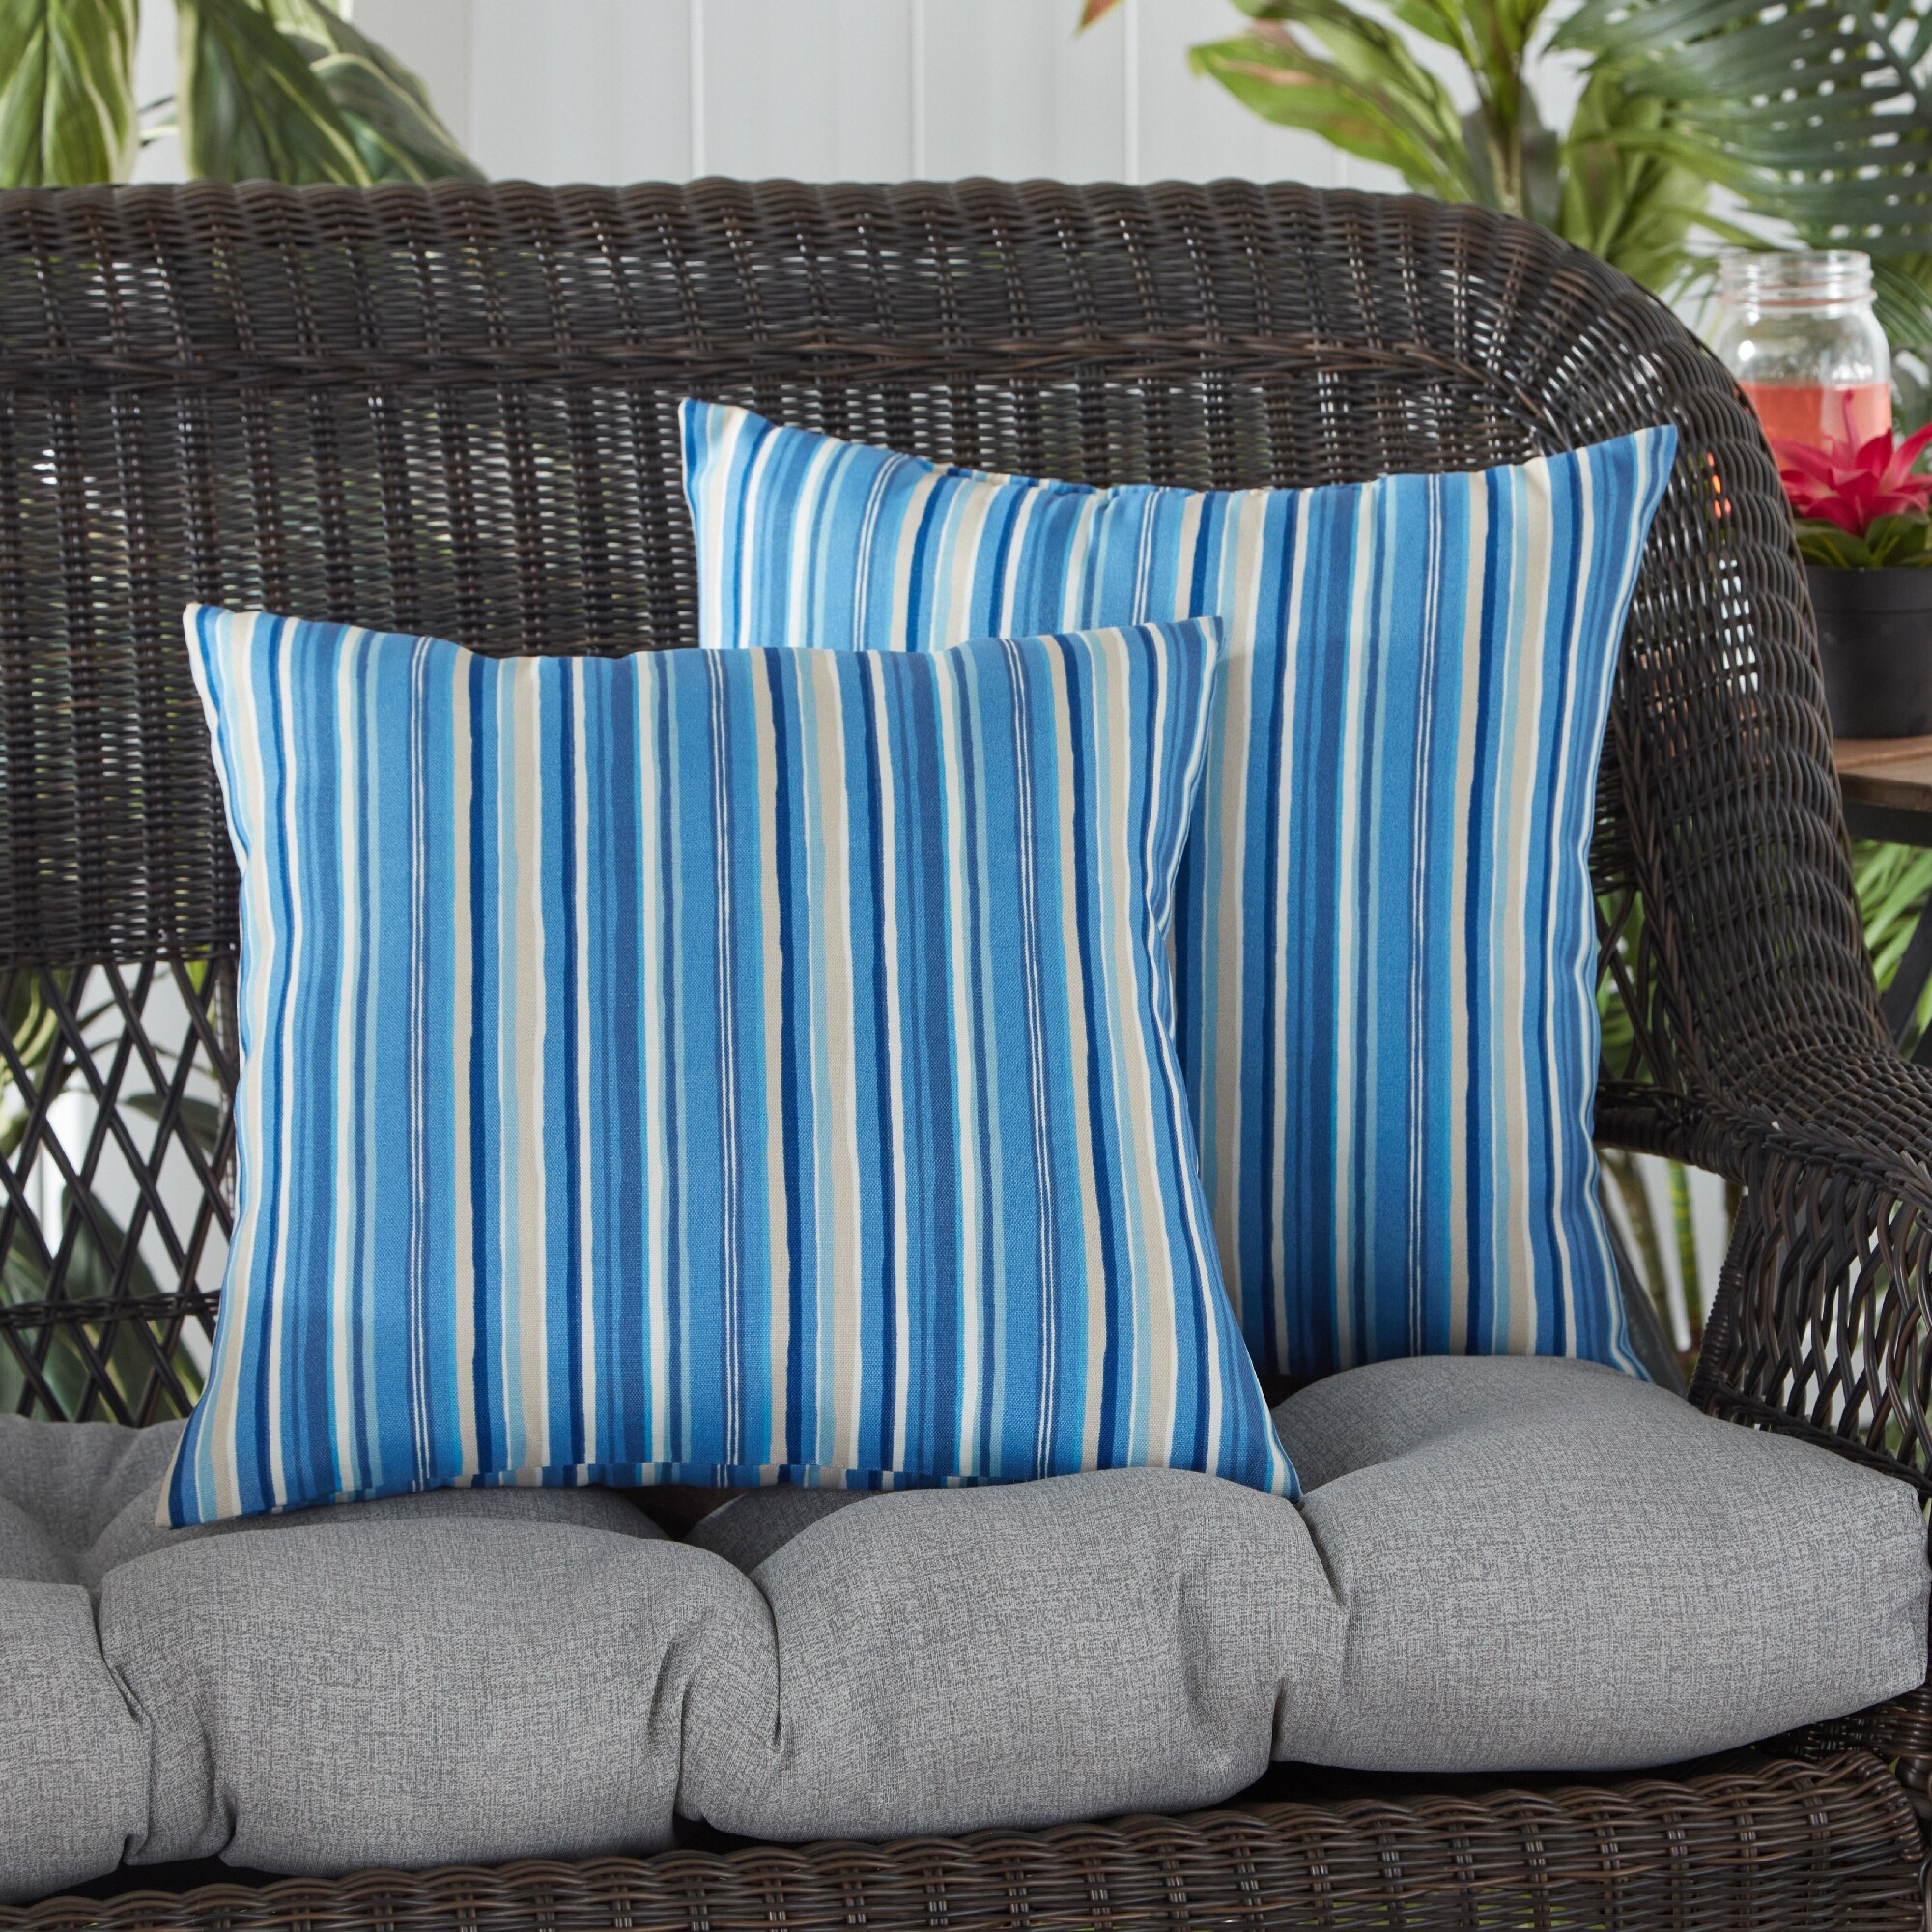 https://ak1.ostkcdn.com/images/products/is/images/direct/888a966eb0e088687ee16b5634bc3cb40c573f58/Greendale-Home-Fashions-Coastal-Stripe-Outdoor-17-inch-Square-Accent-Pillow-%28Set-of-2%29.jpg